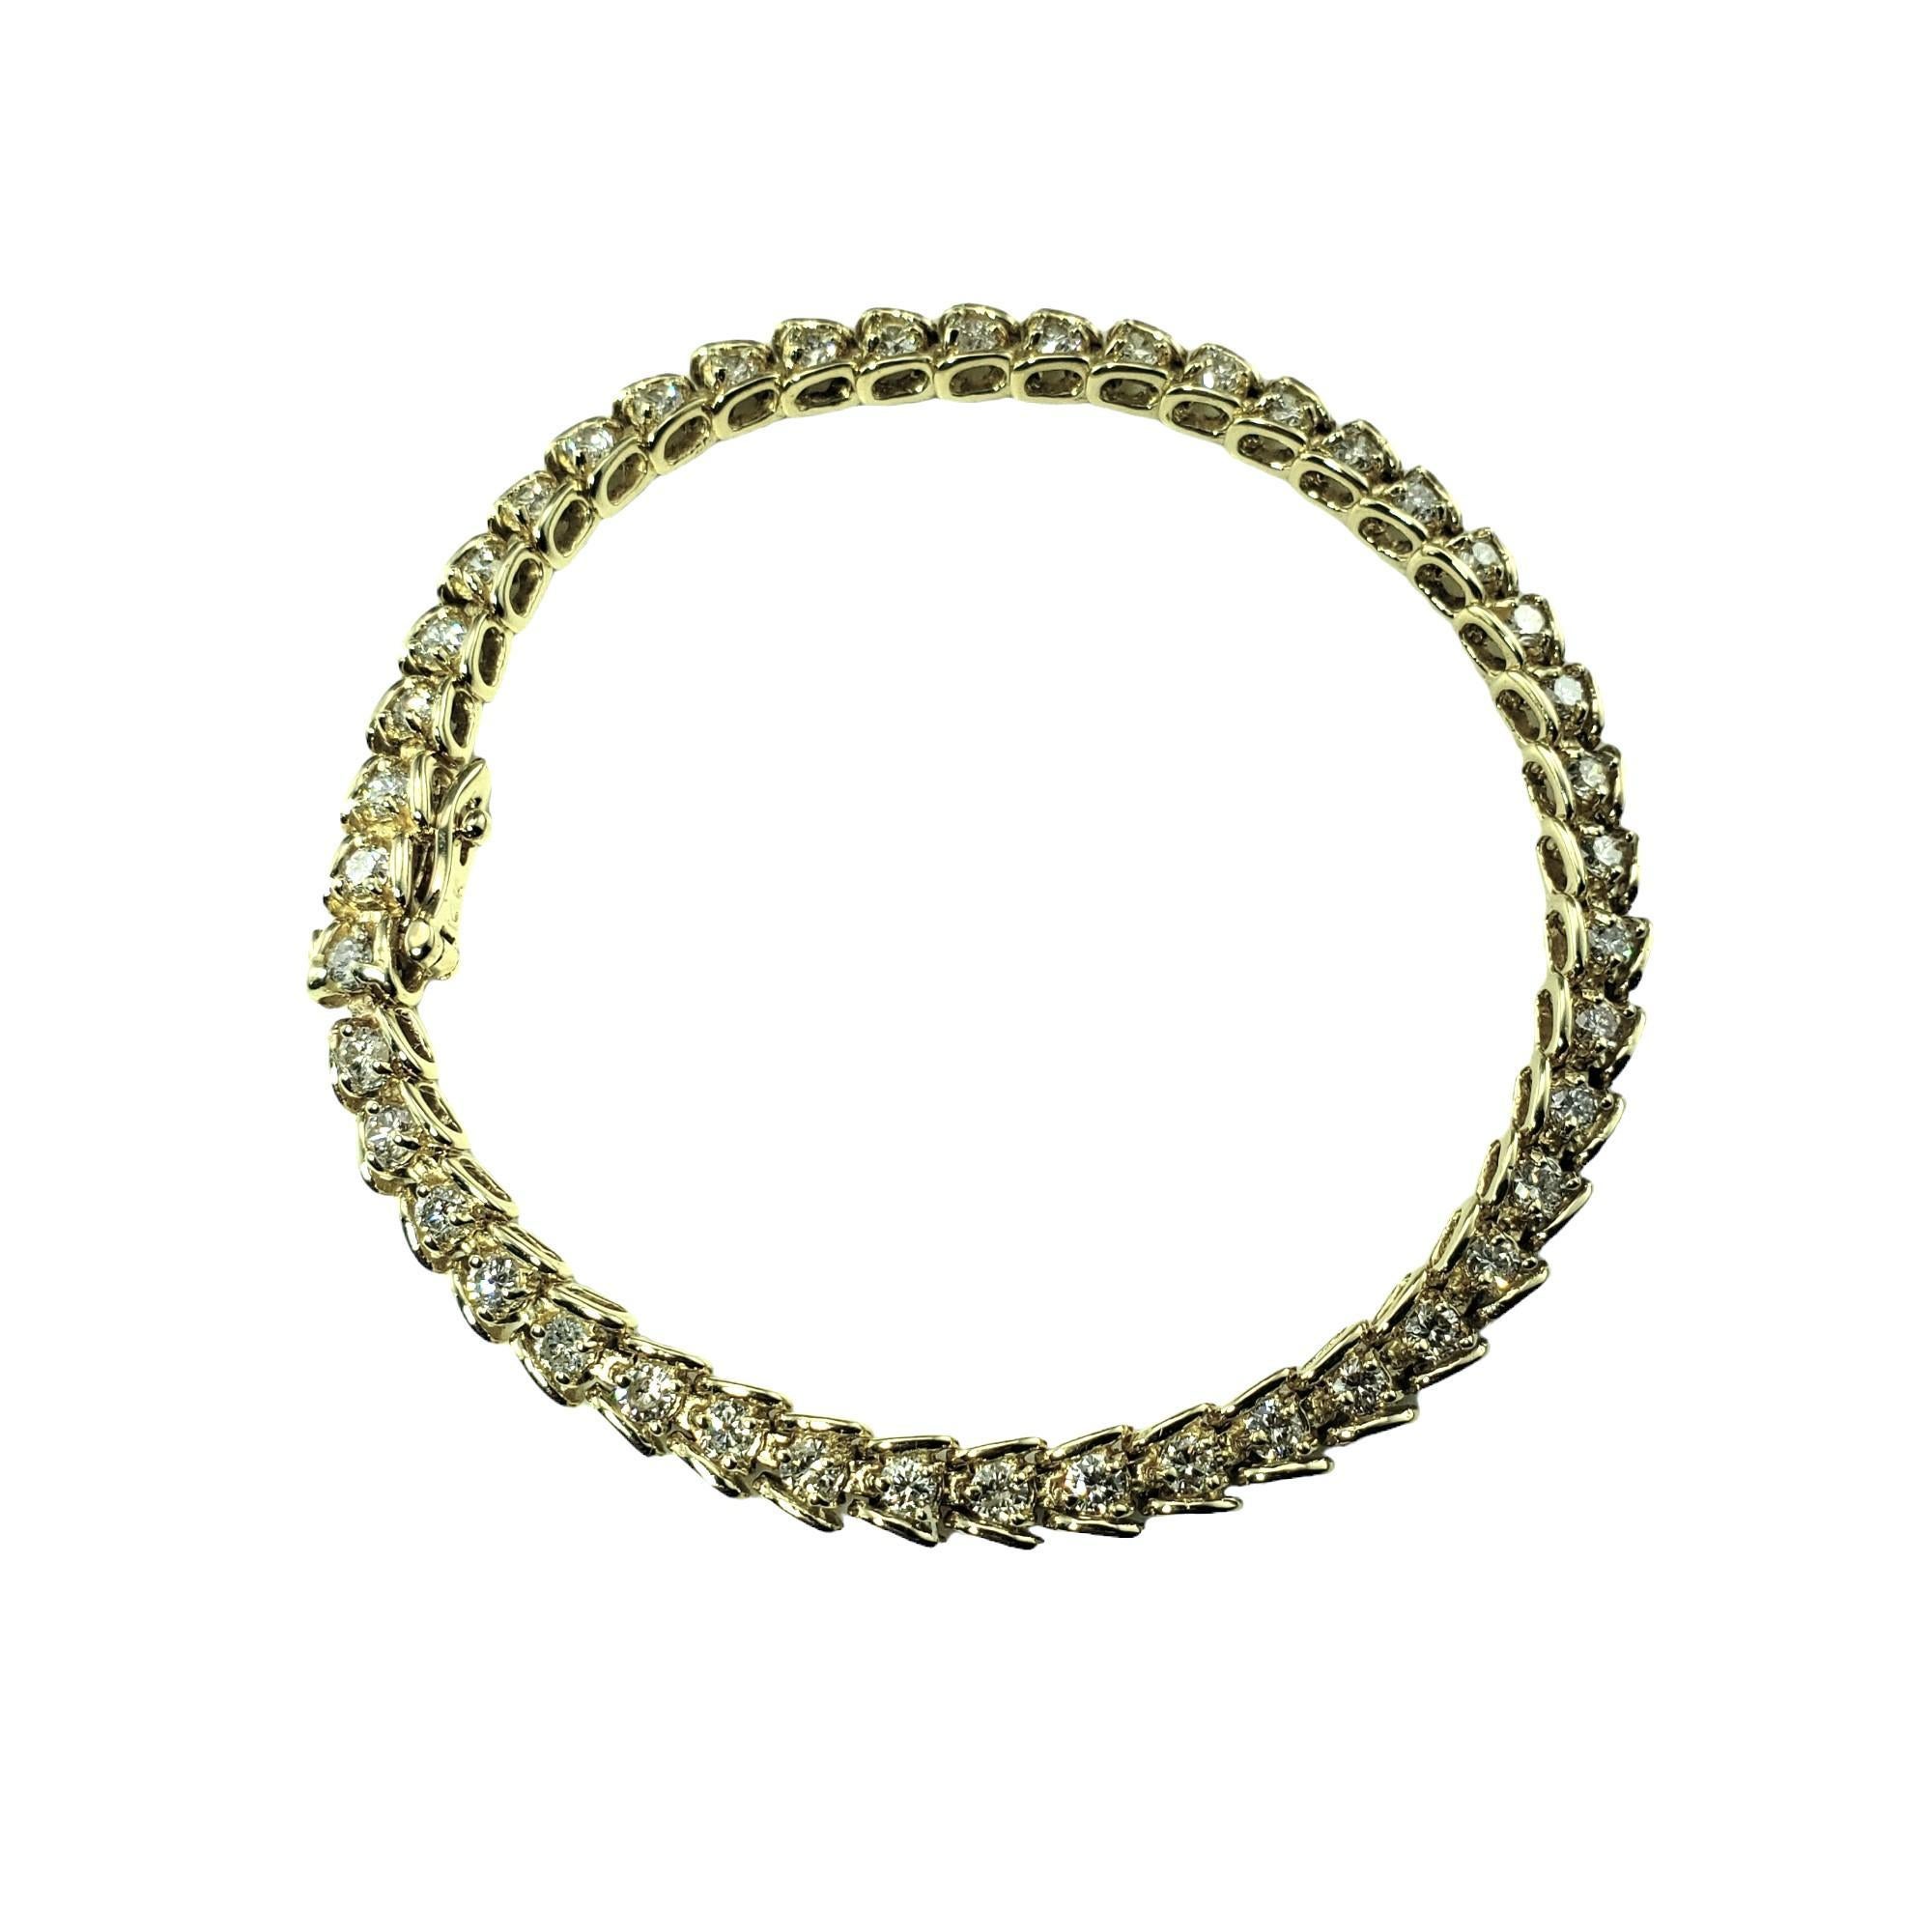 Vintage 14 Karat Yellow Gold Diamond Tennis Bracelet-

This sparkling bracelet features 44 round brilliant cut diamonds (width: 5 mm) set in beautifully detailed 14K yellow gold. 

Approximate total diamond weight: 2.20 ct.

Diamond color: 